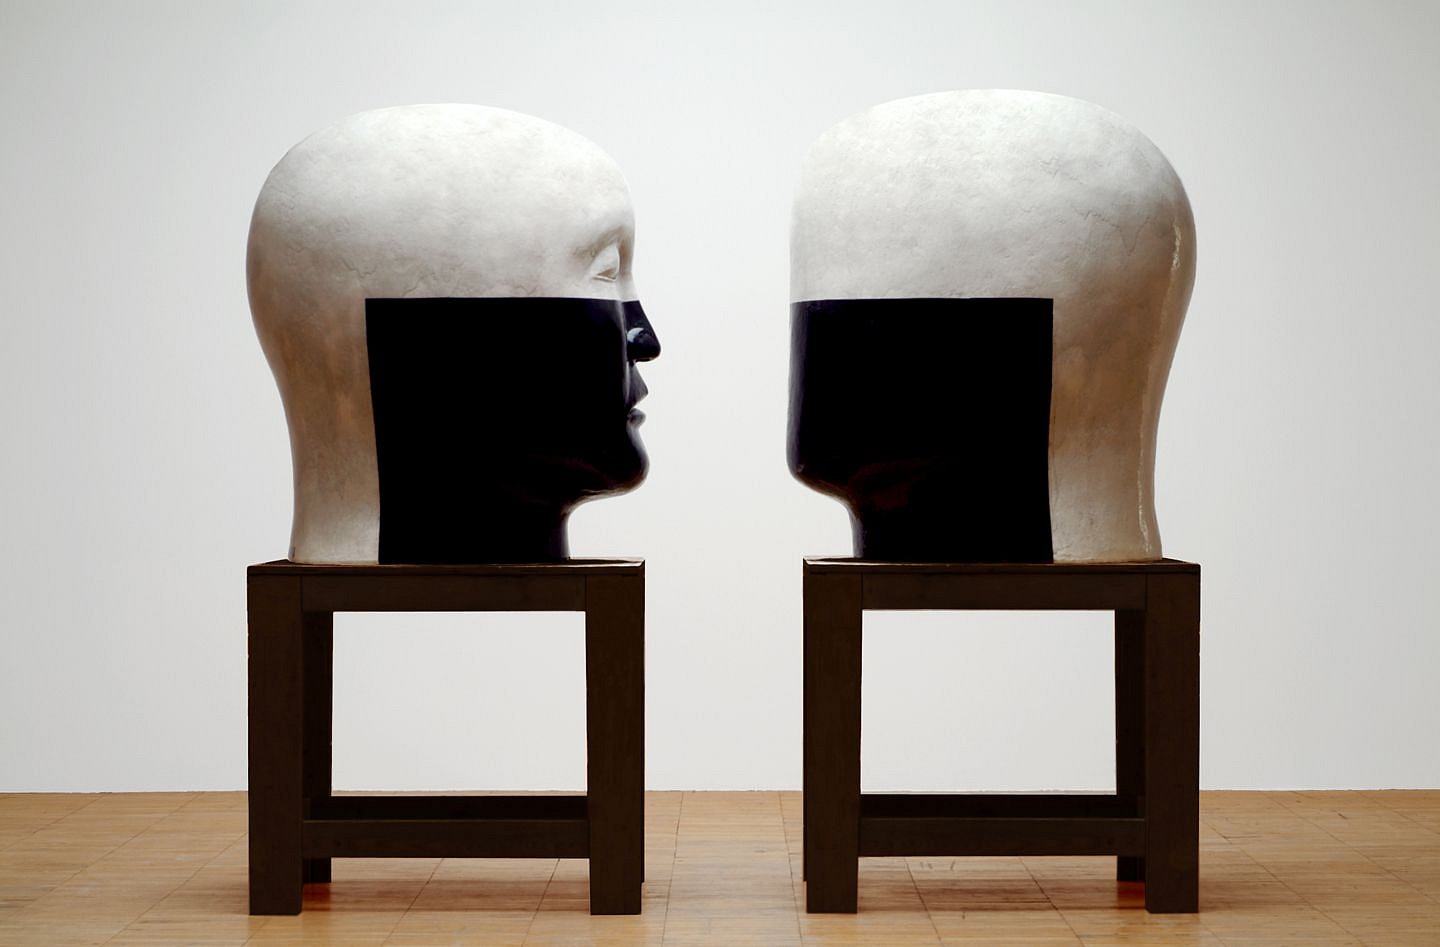 Jun Kaneko, Heads 03-11-14, 2003
Hand Built Glazed Ceramics, no features: 45 x 32 x 39 in, features: 44 x 32 x 38 in, Aluminum Table Size: 32 x 37 x 32 in. 
KANE0080